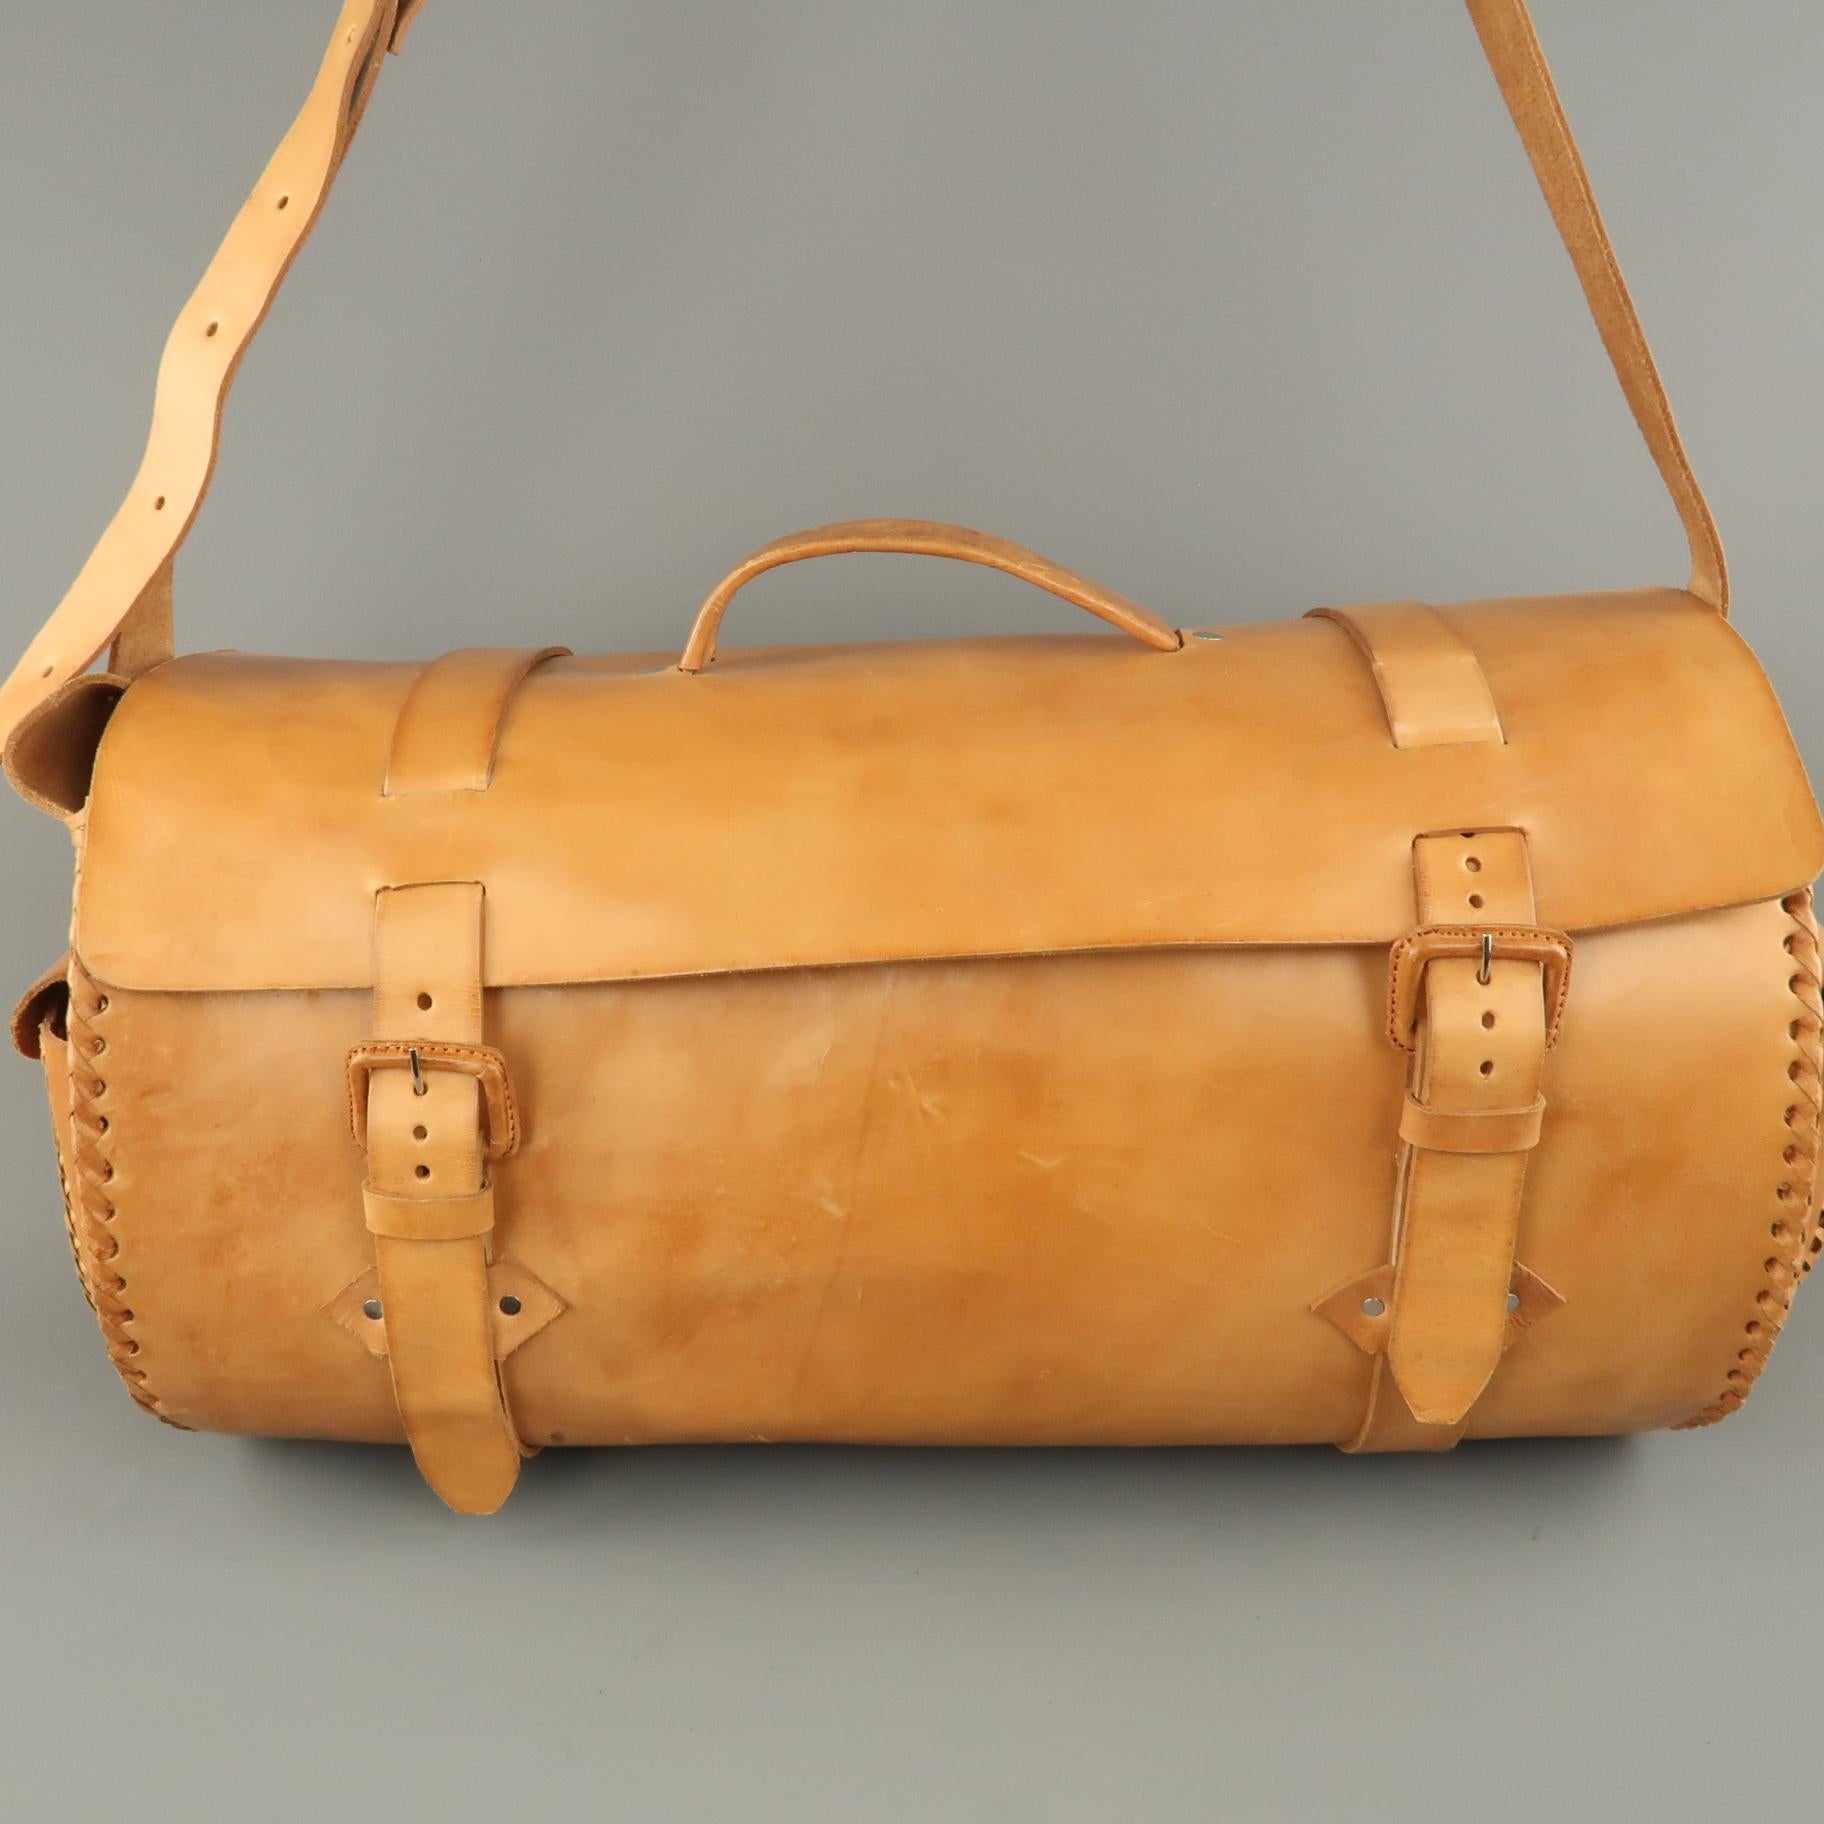 EUROPEAN NATURAL LEATHER BAGS duffel bag comes in natural tan leather with a double belted flap closure top, top handle, side pockets, woven trim, and shoulder strap. Wear throughout. As-is.
 
Good Pre-Owned Condition.
 
Measurements:
 
Length: 22